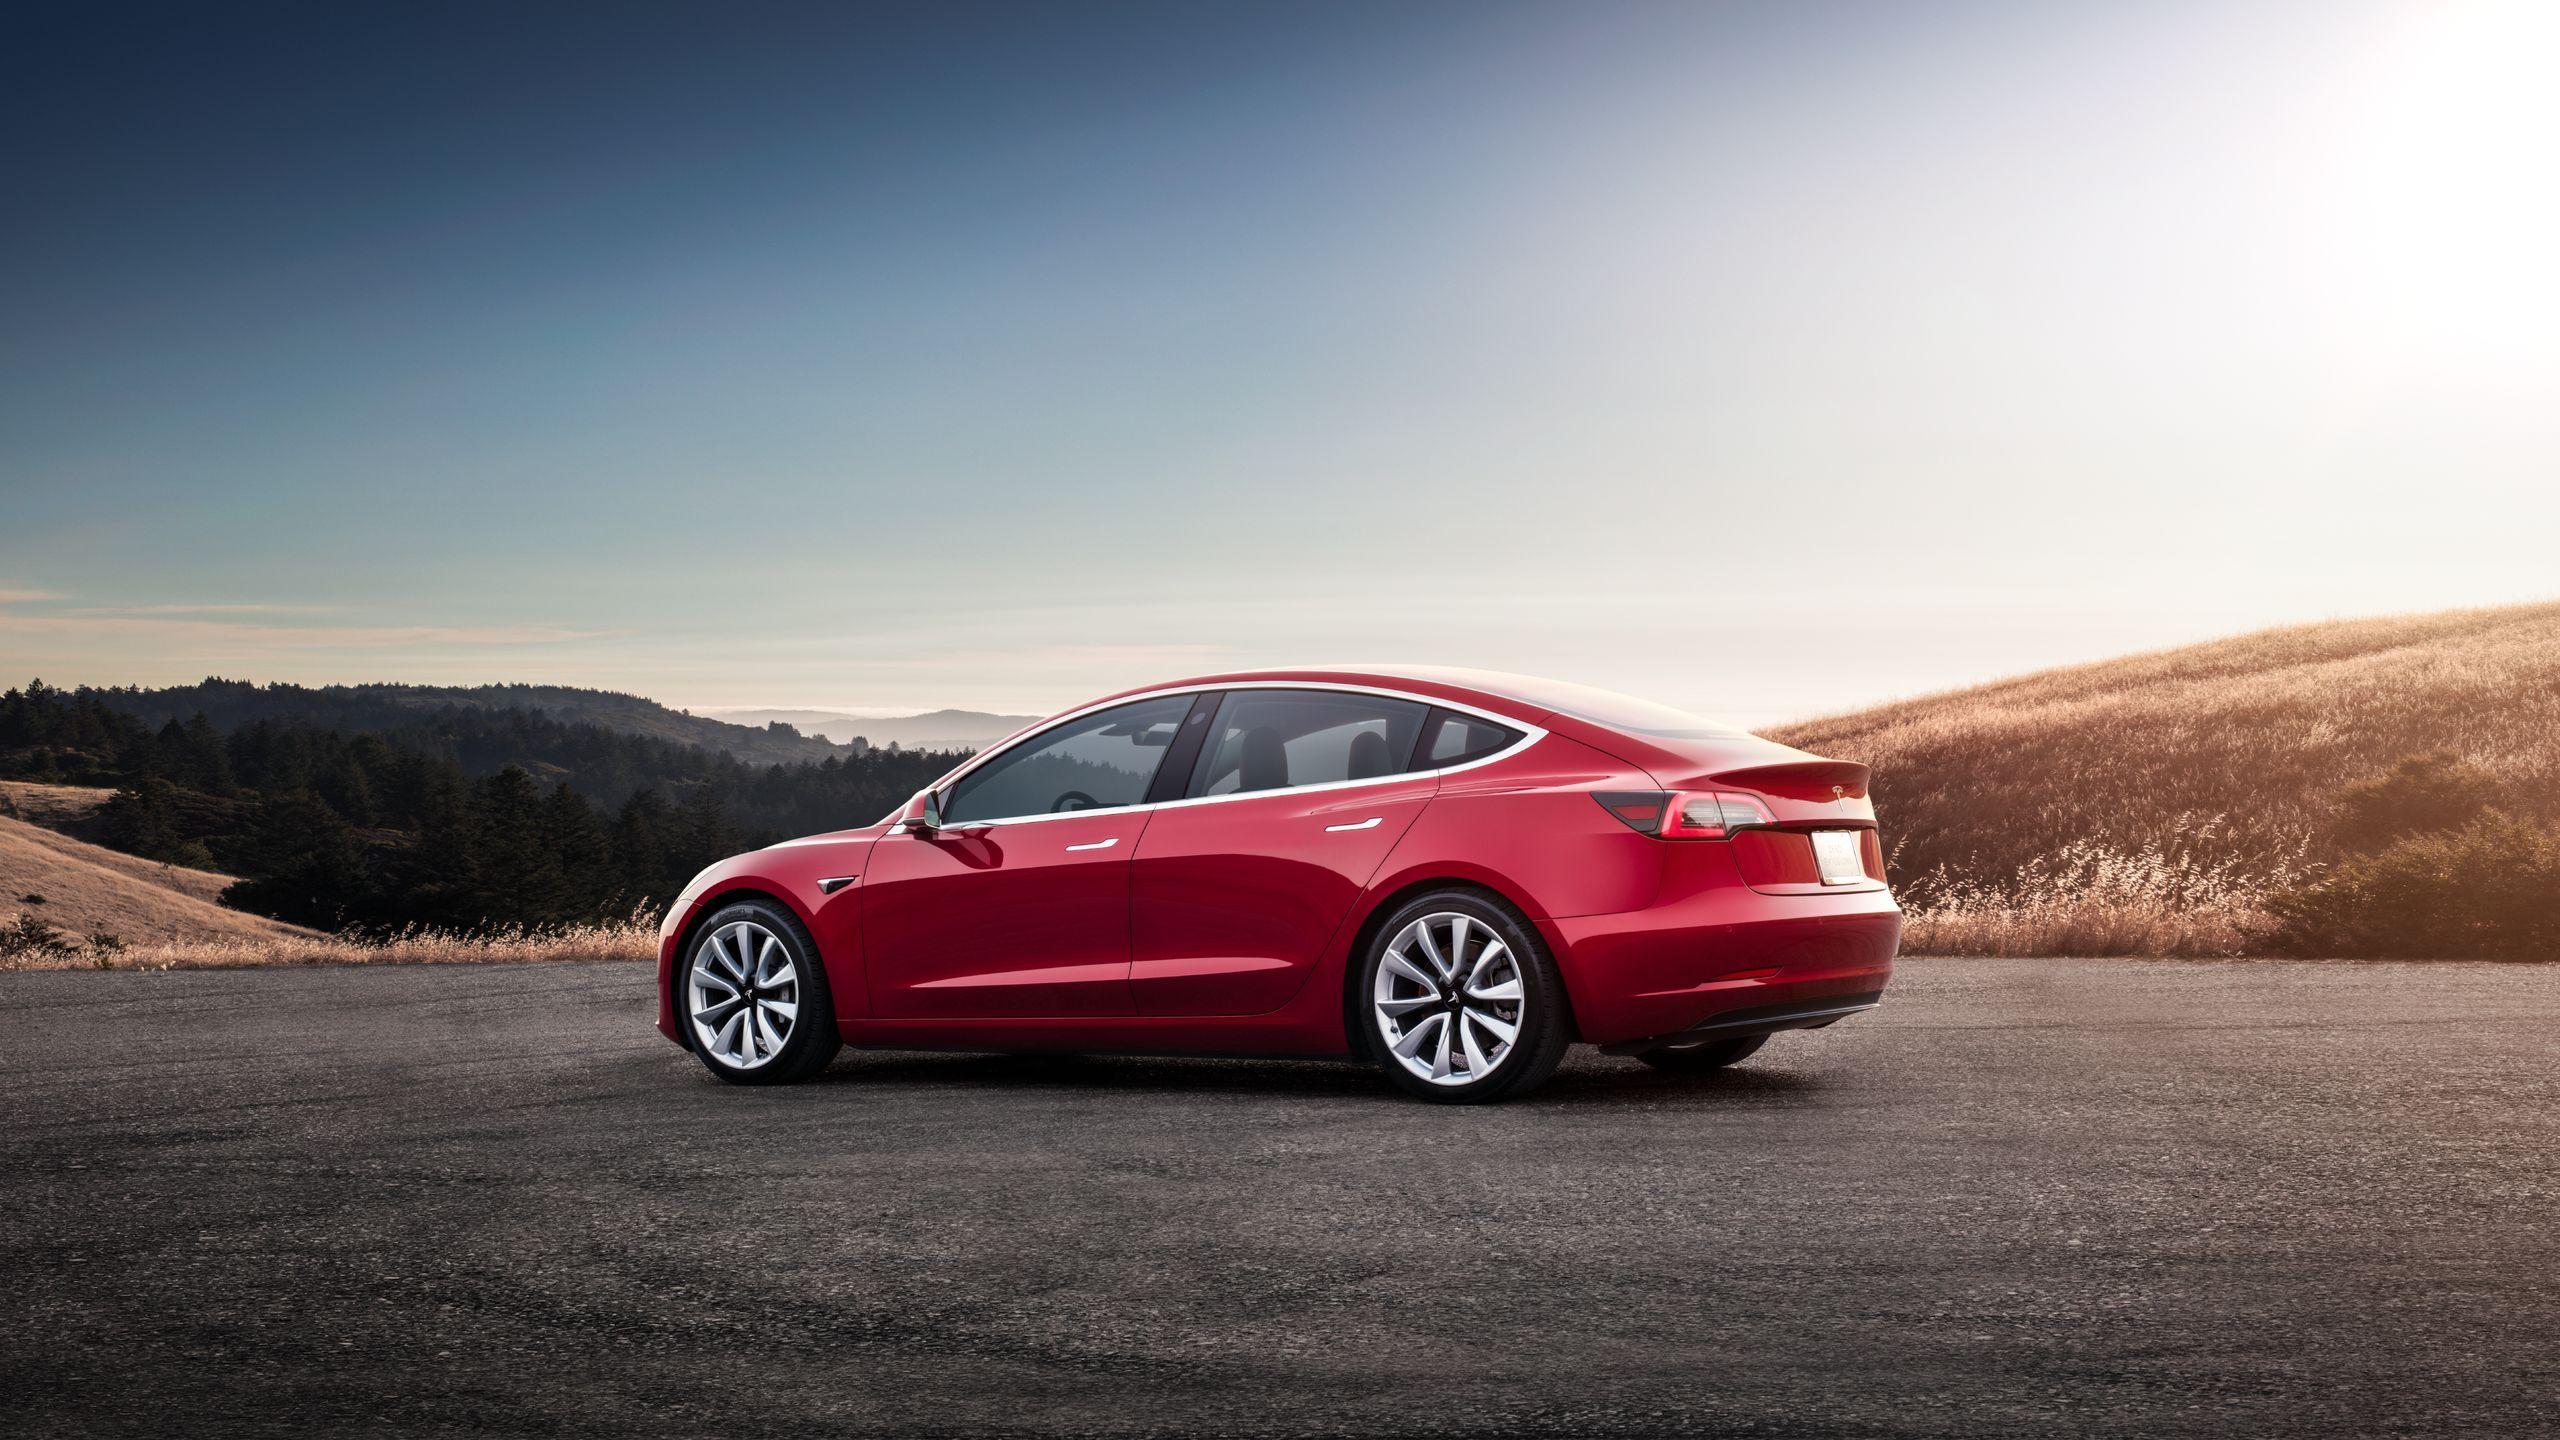 Wallpaper Wednesday: Featuring The Tesla Model S, X And 3